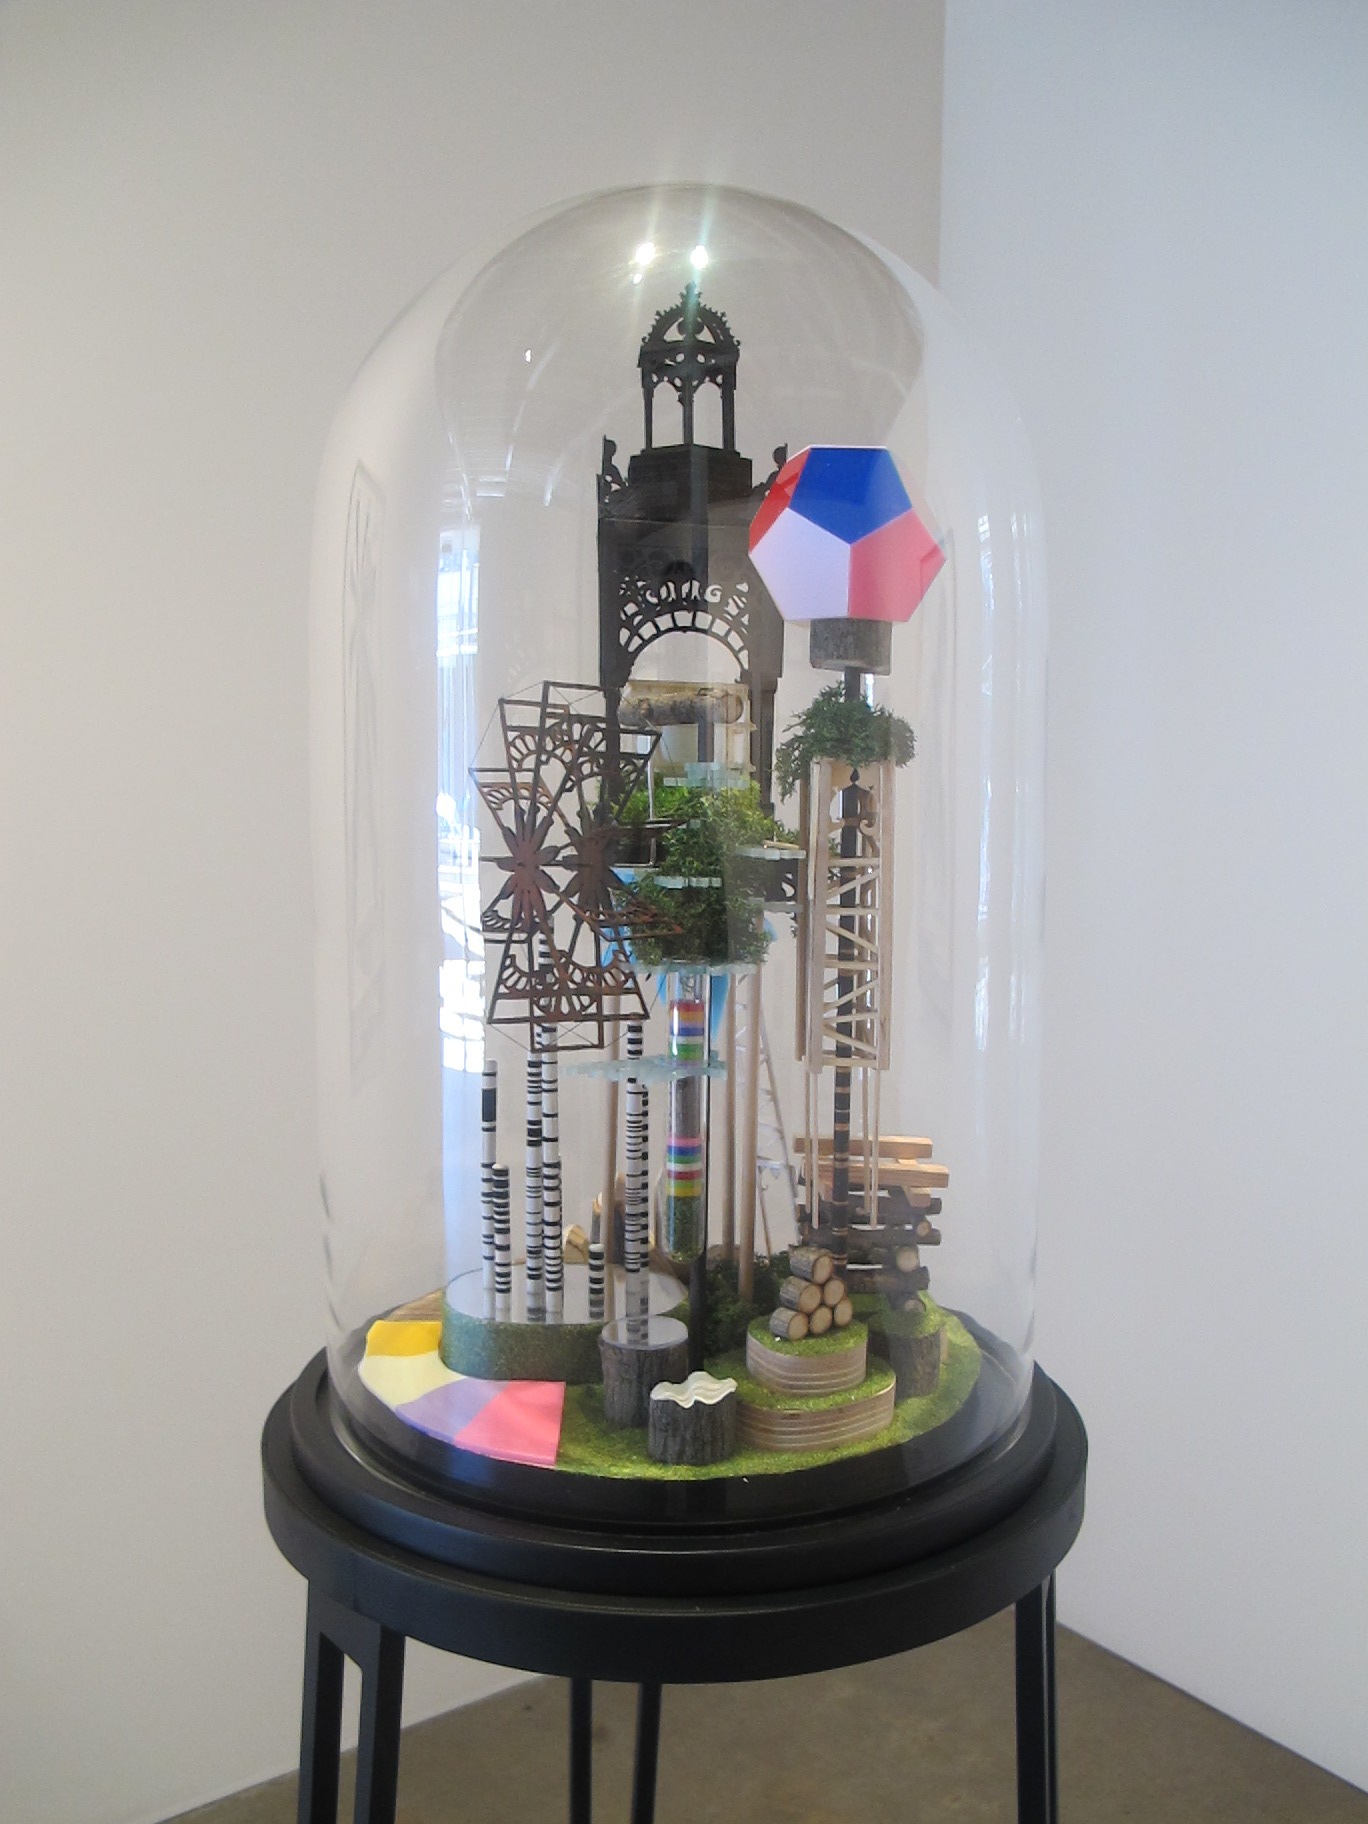  Simon MacEwan,&nbsp; The works of industry of all nations , 2011, steel, wood, perspex, foam, wood veneer, lichen, model grass, ping pong ball, glass dome, 160 x 40 x 40cm 